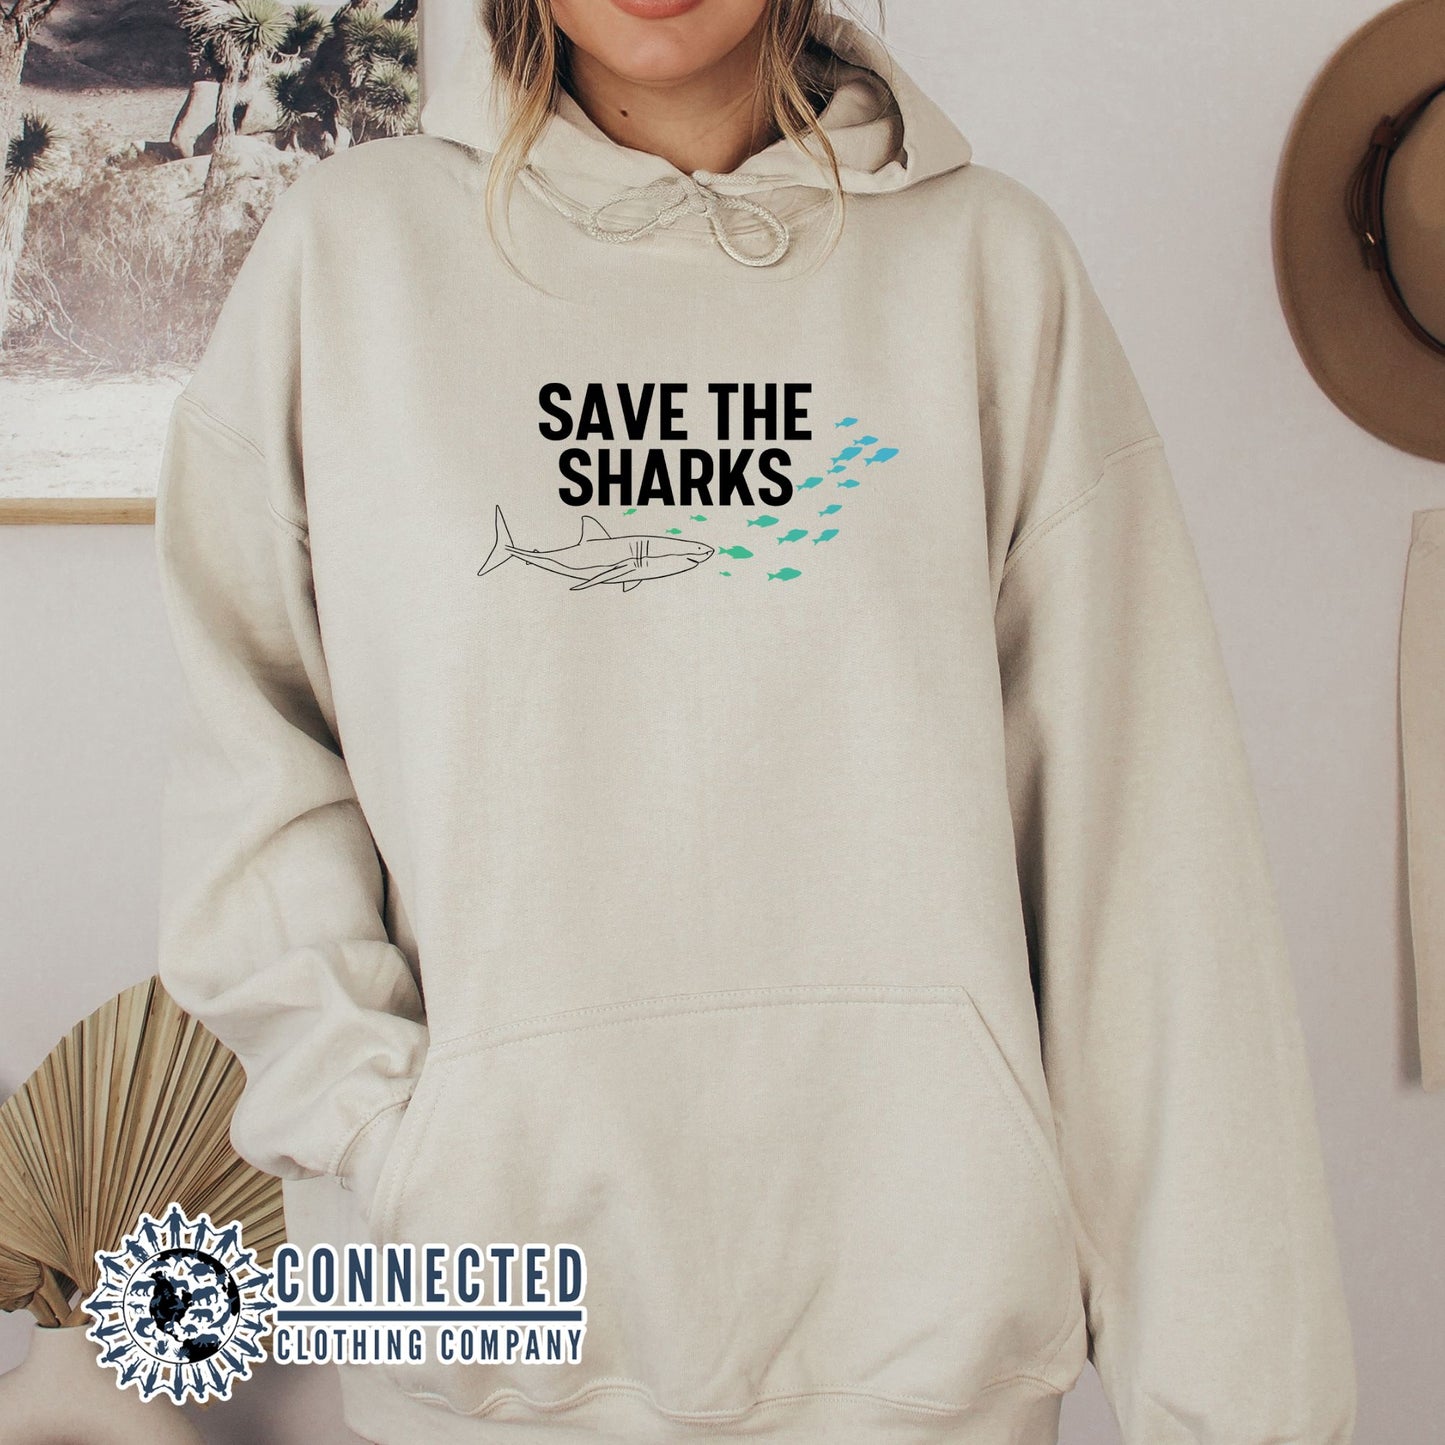 Save The Sharks Species Hoodie - Connected Clothing Company - 10% donated to shark conservation